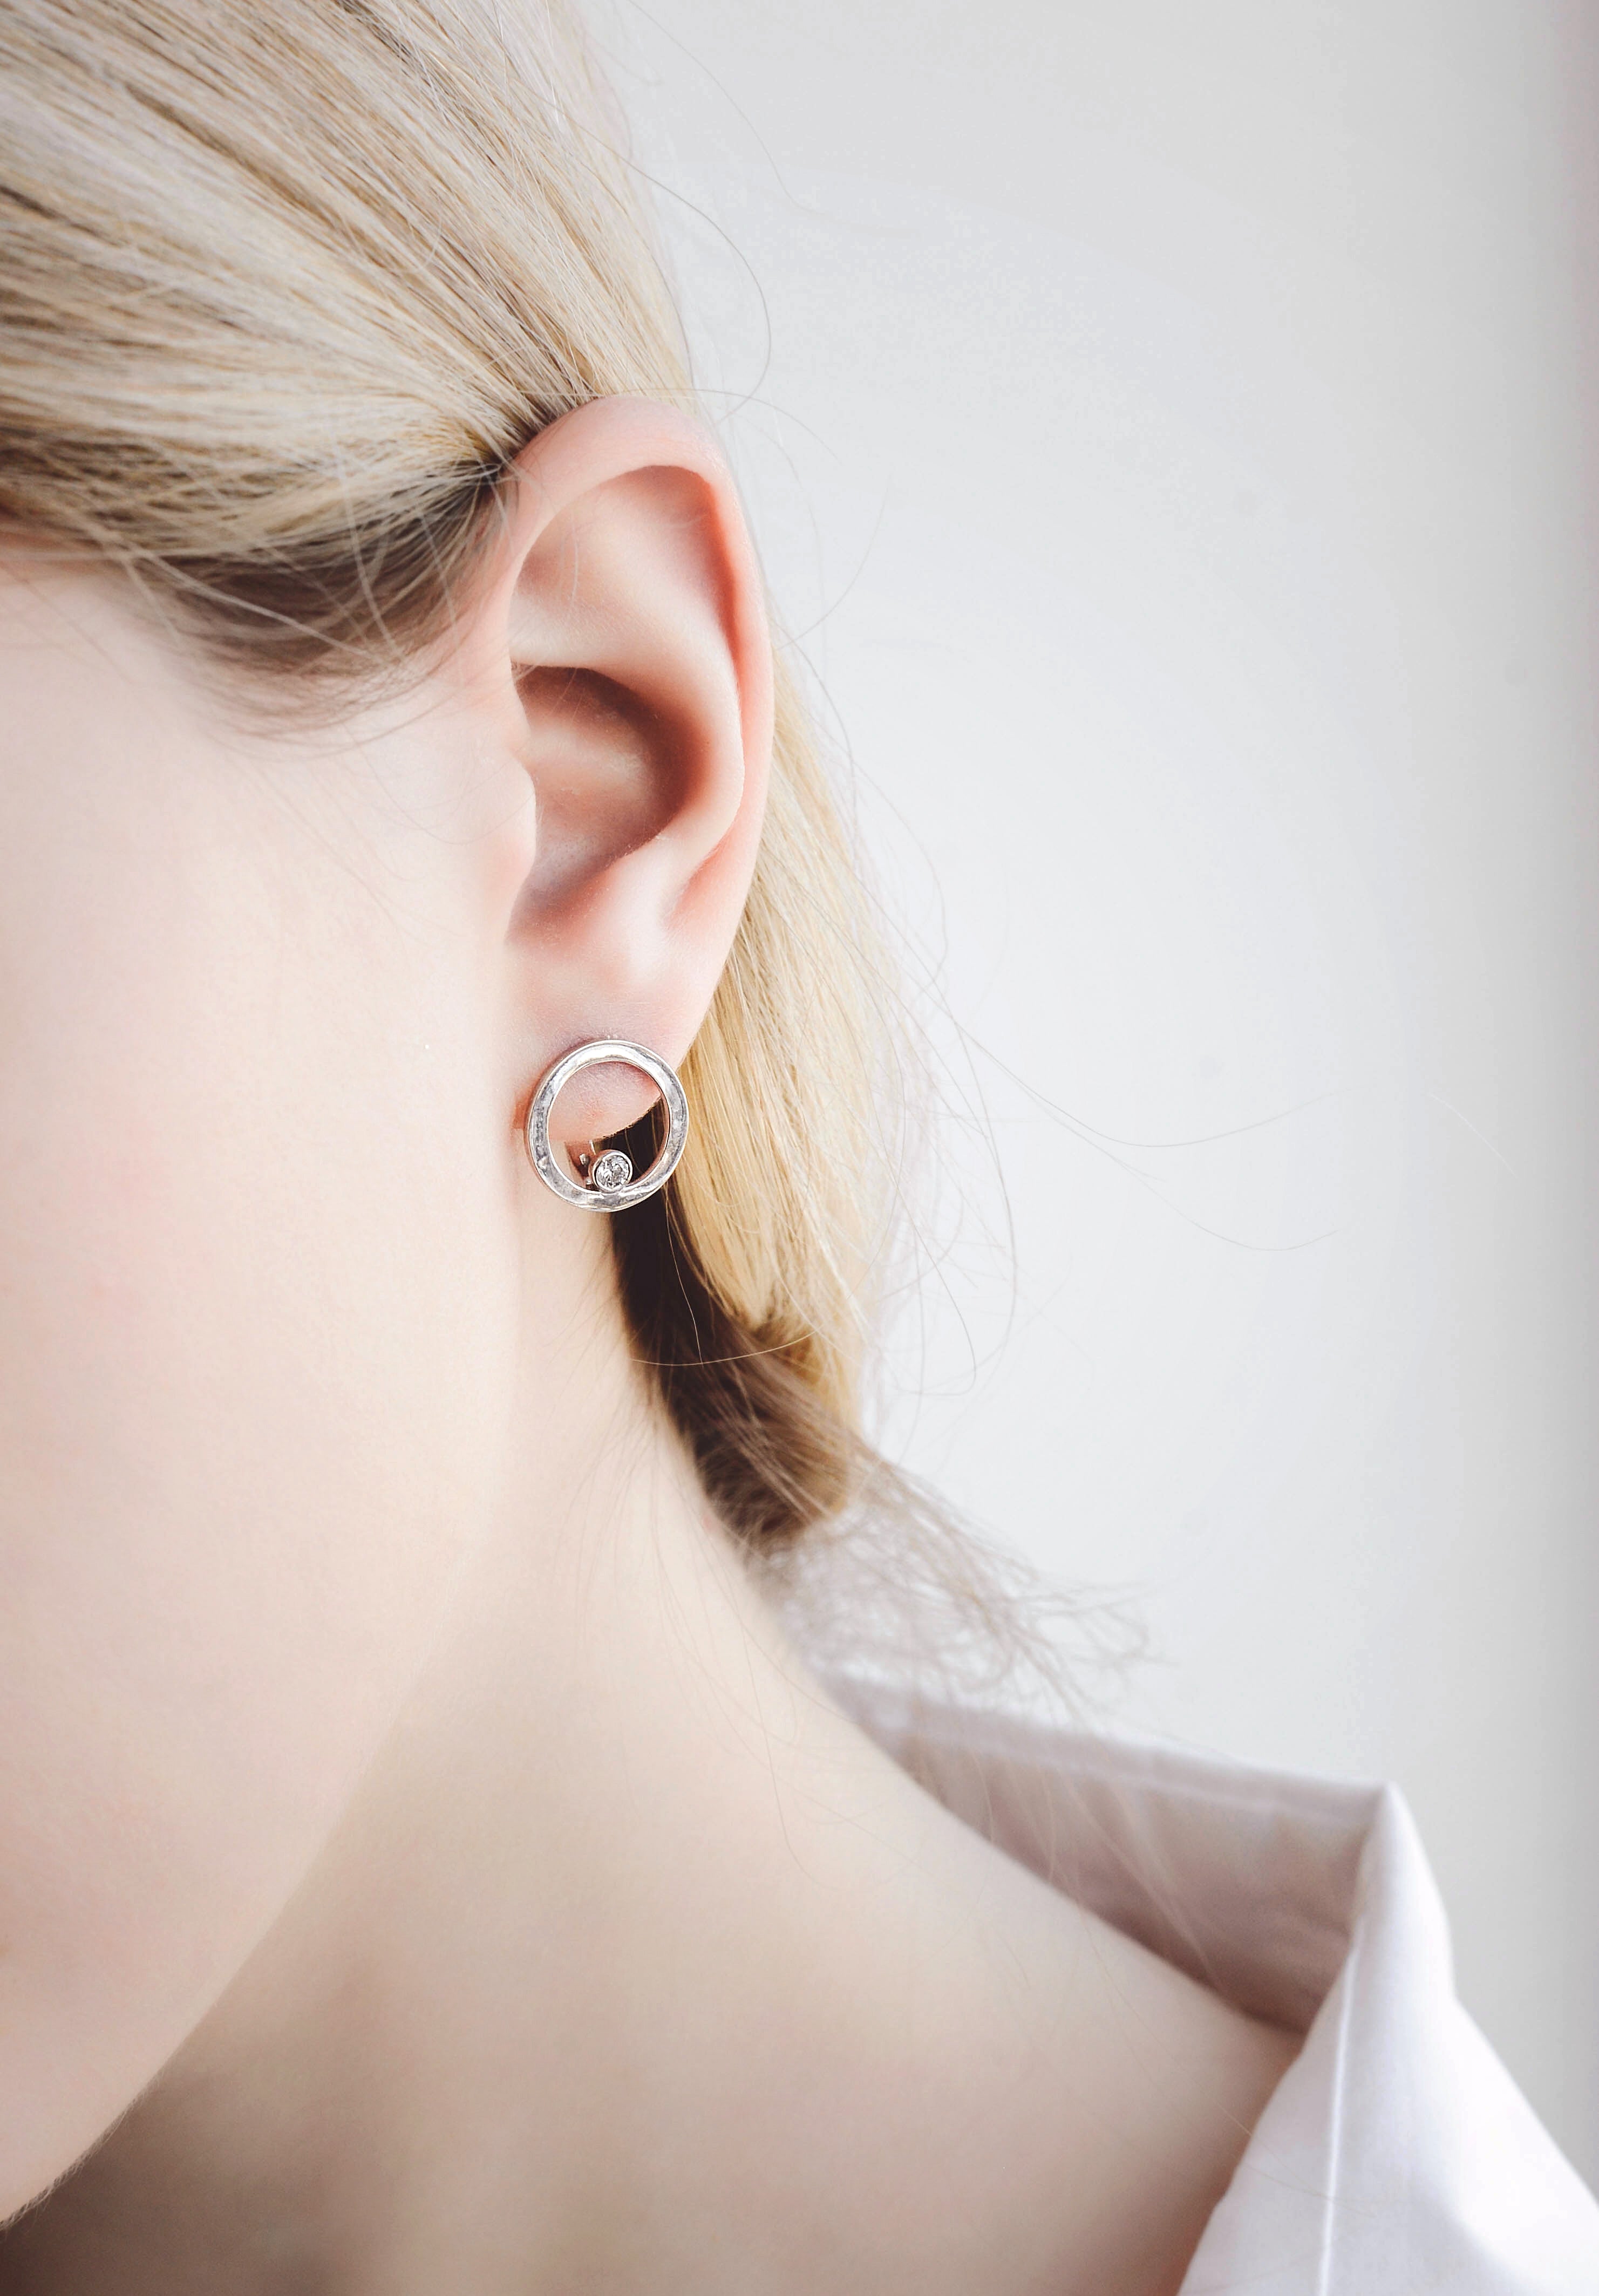 Model wearing lever back earrings in 14K white gold decorated with diamond-cut zirconium.